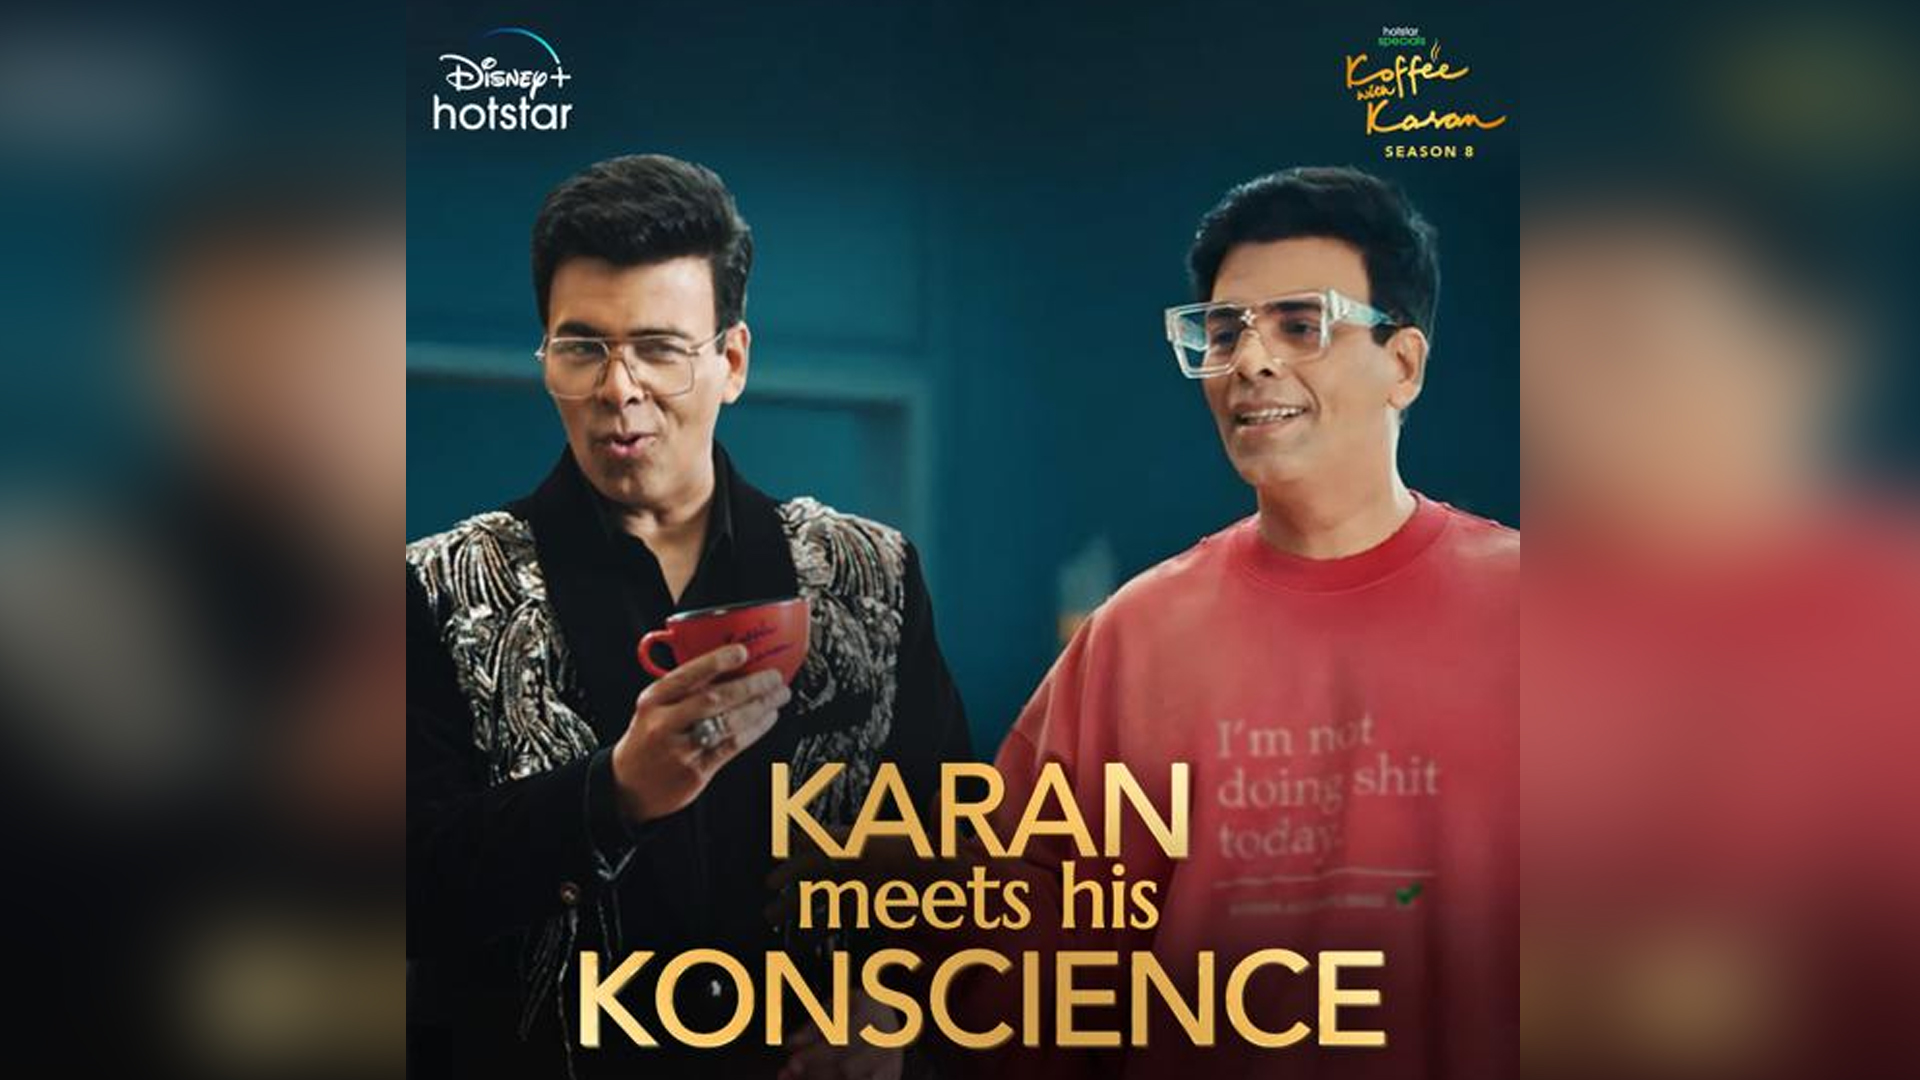 Why wait! Let’s brew Koffee with Karan Season 8, exclusively on Disney+ Hotstar